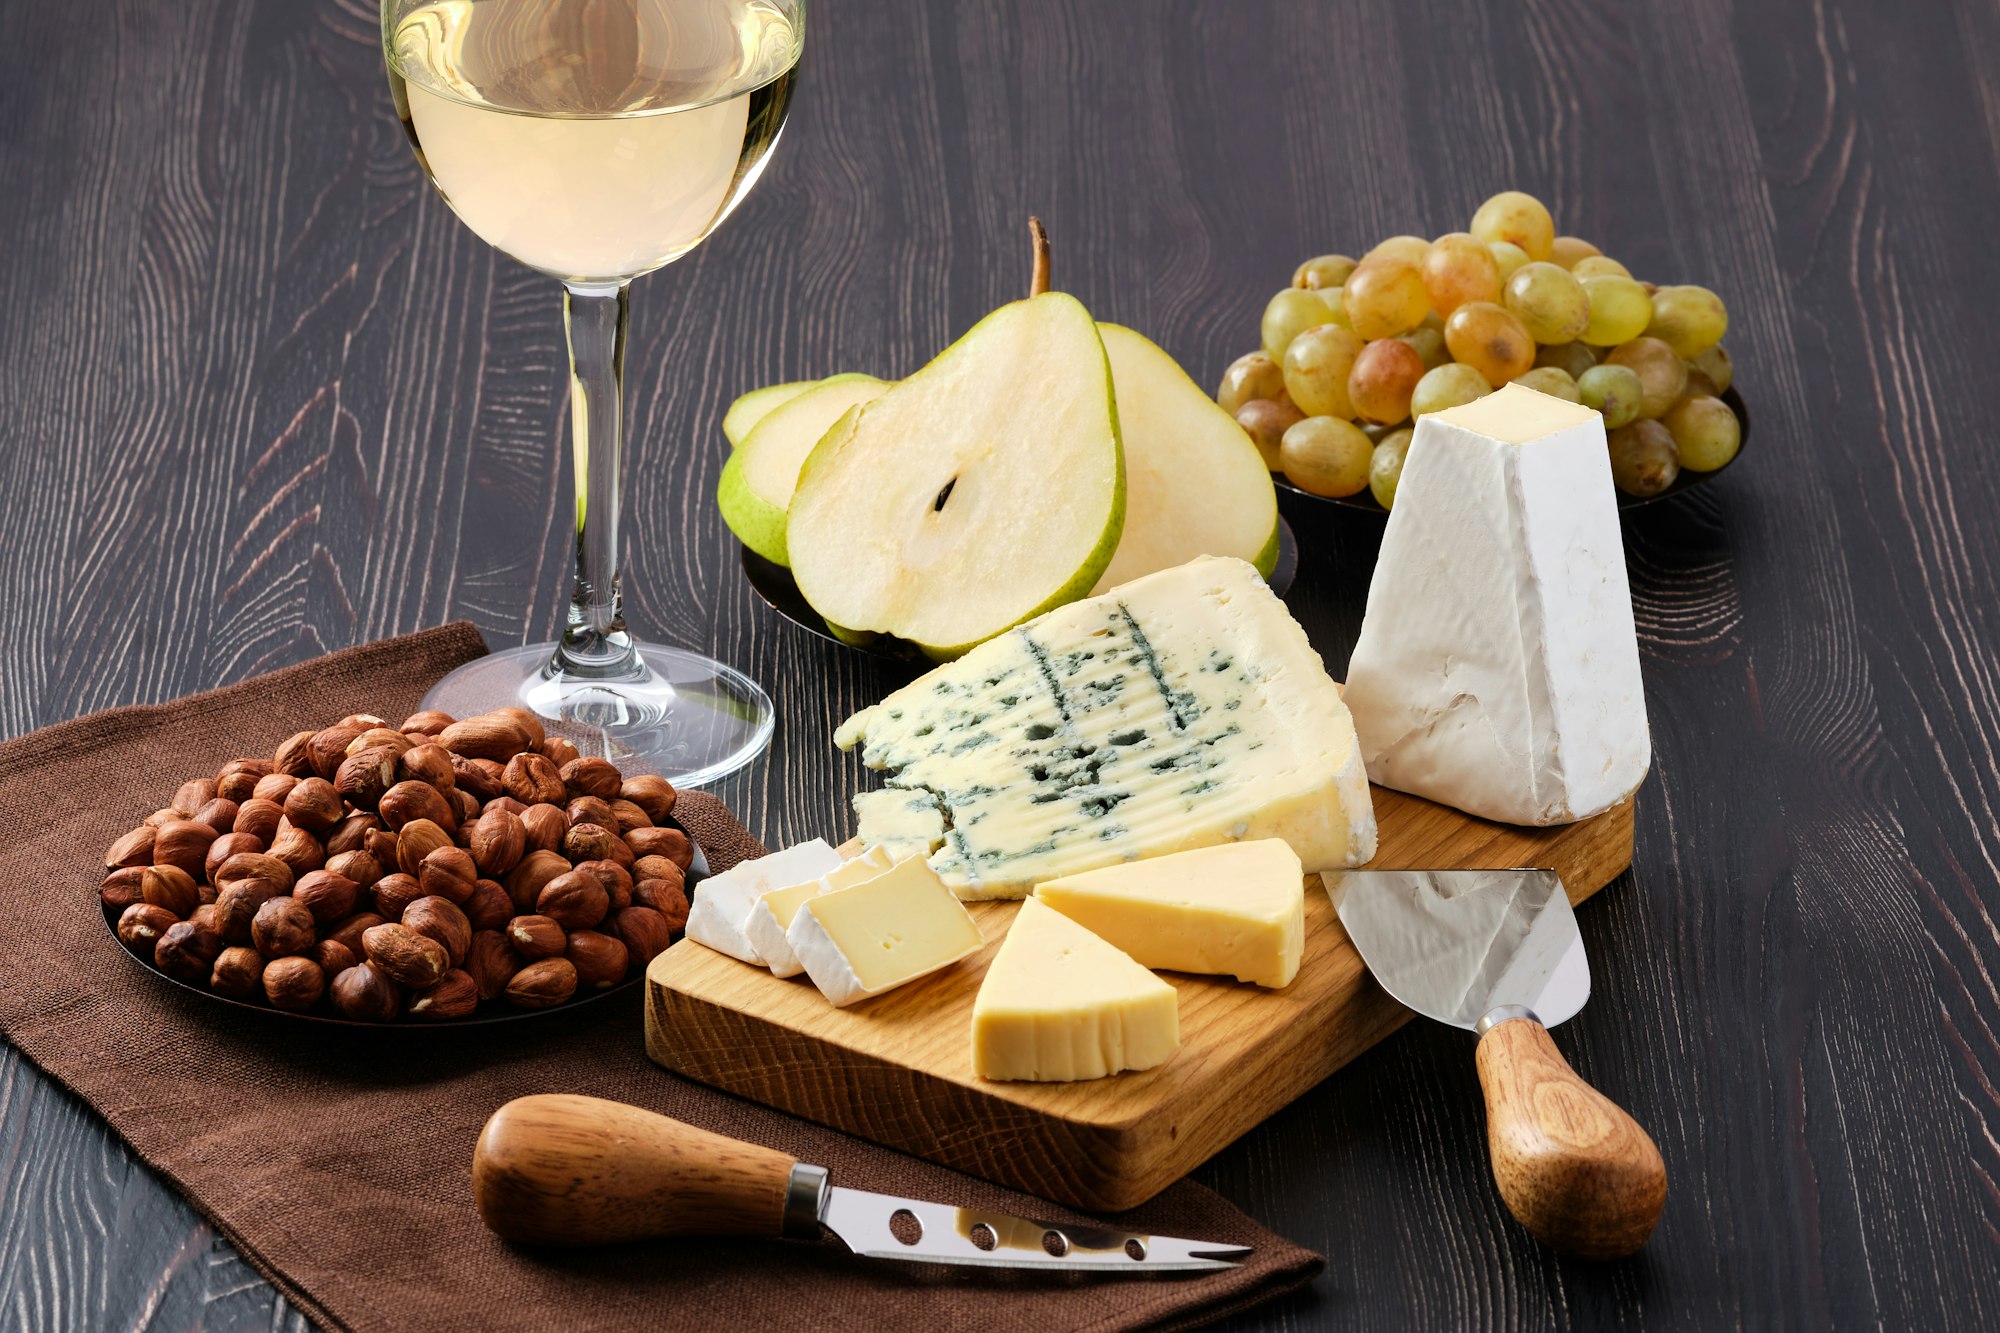 Snack for wine - sheese plate and fruits